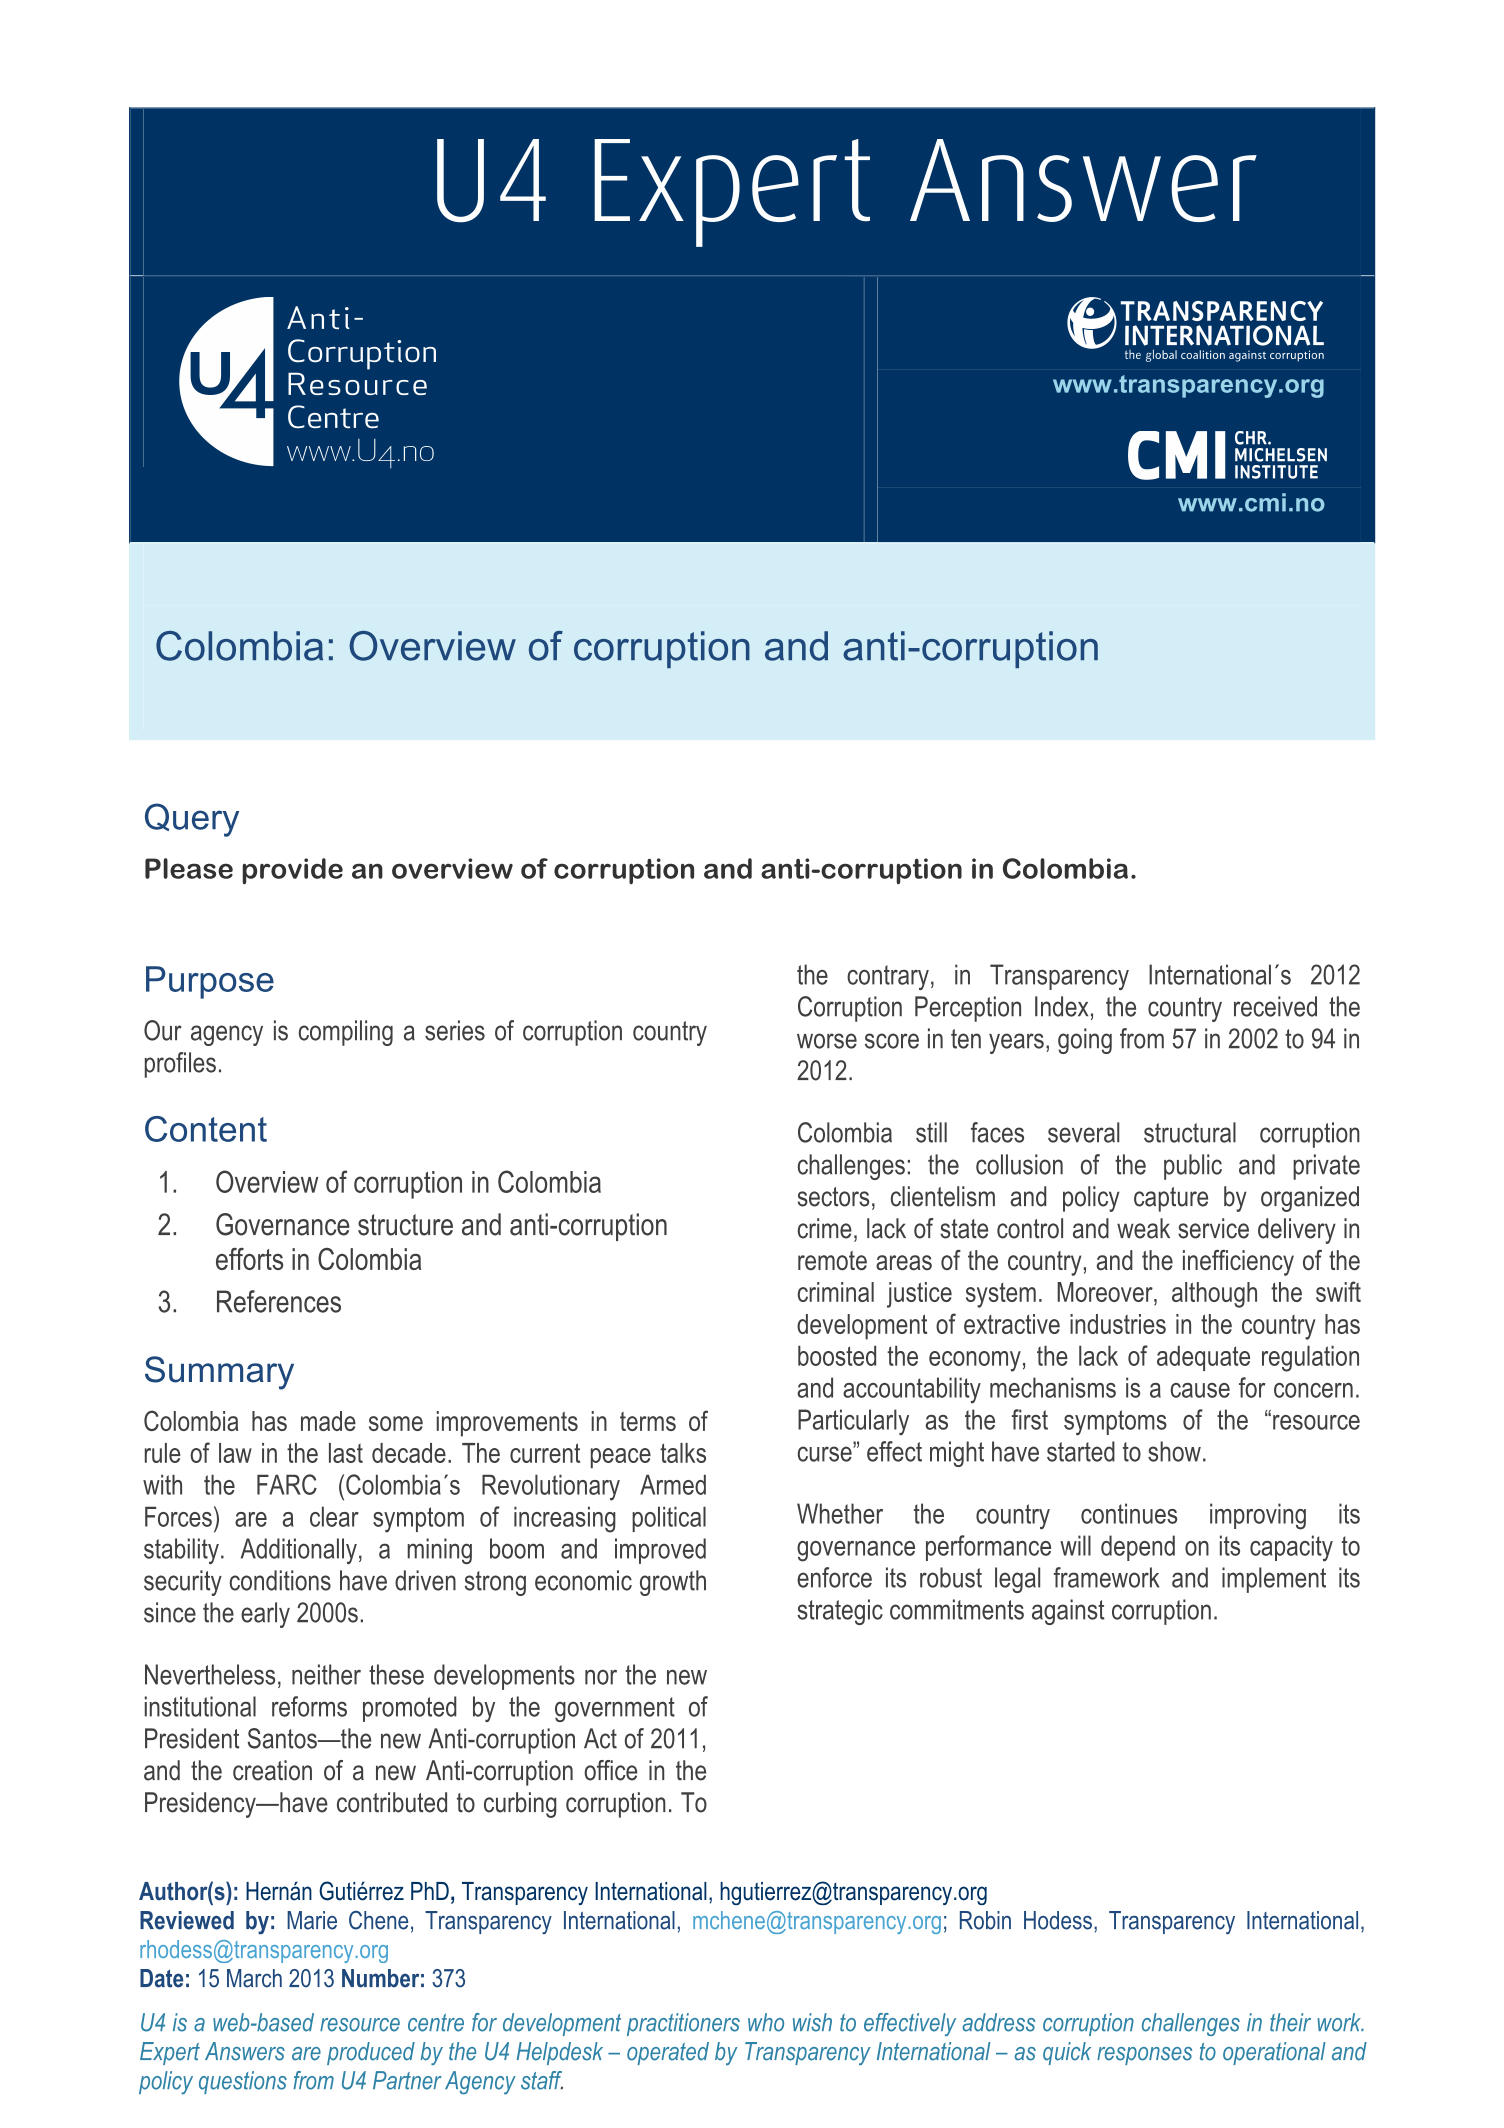 Colombia: Overview of corruption and anti-corruption